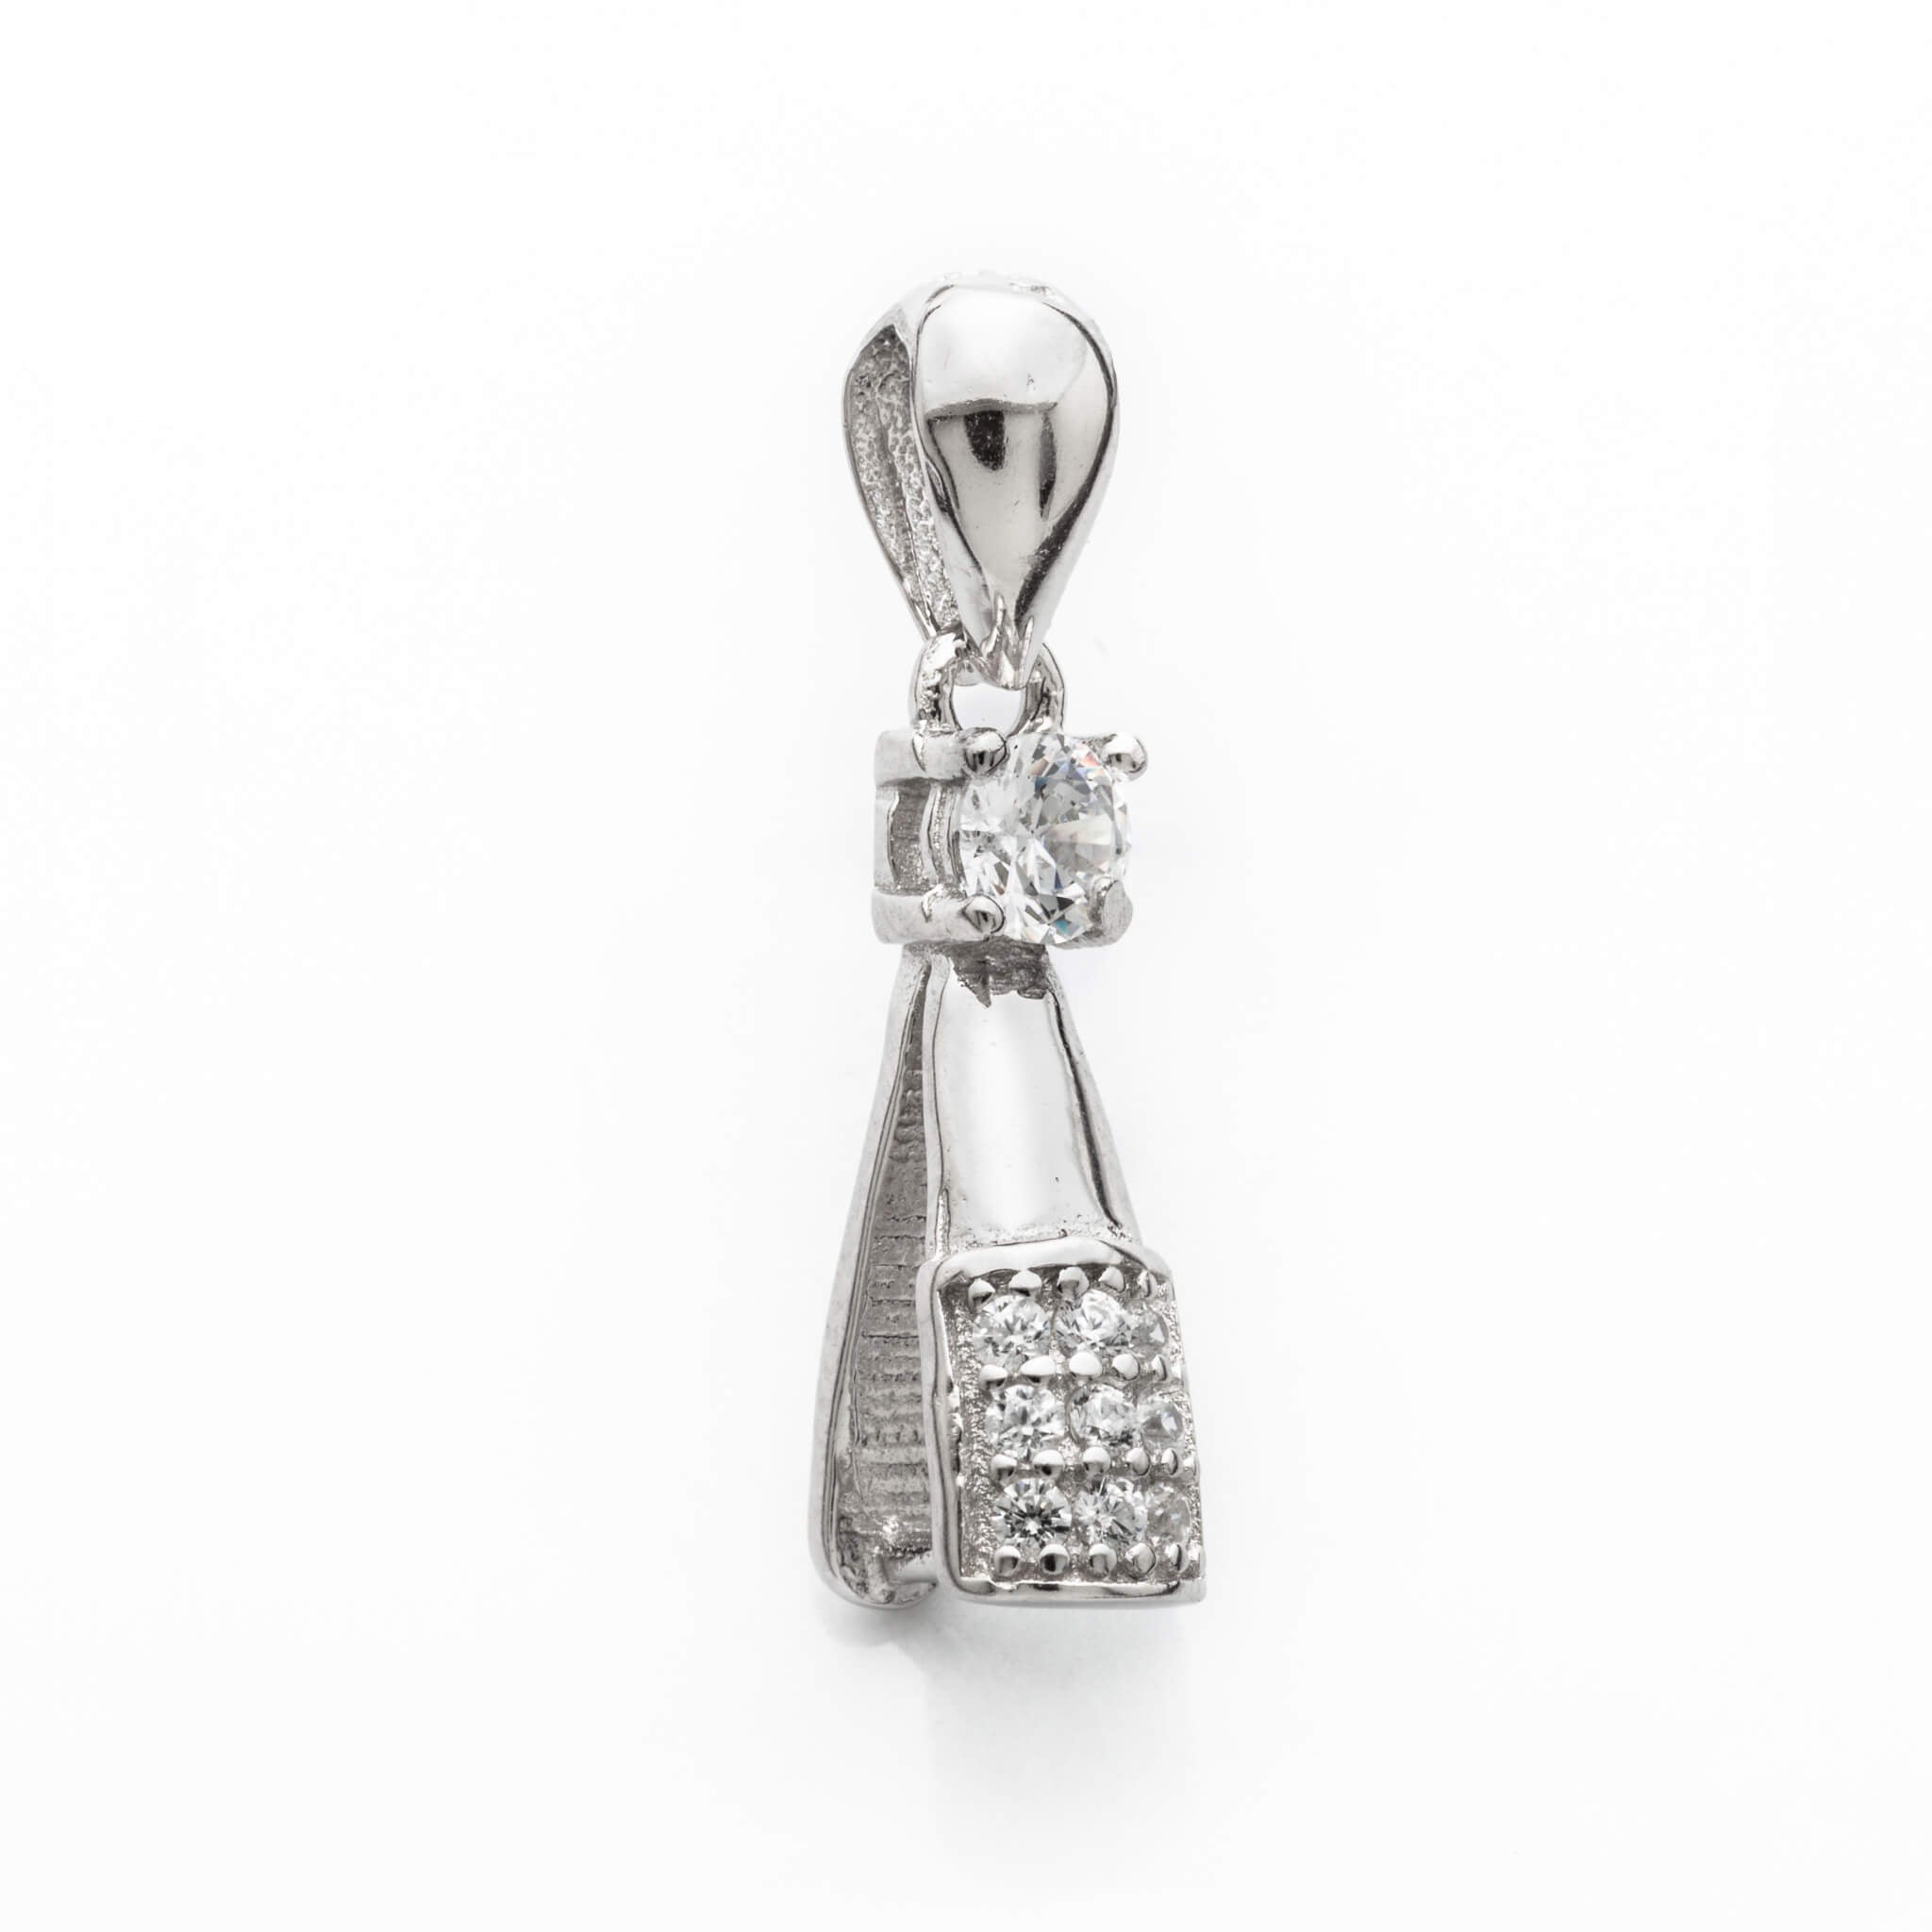 Tapered Pinch Bail with Cubic Zirconia Inlays in Sterling Silver 22.6x8.3x4.8mm